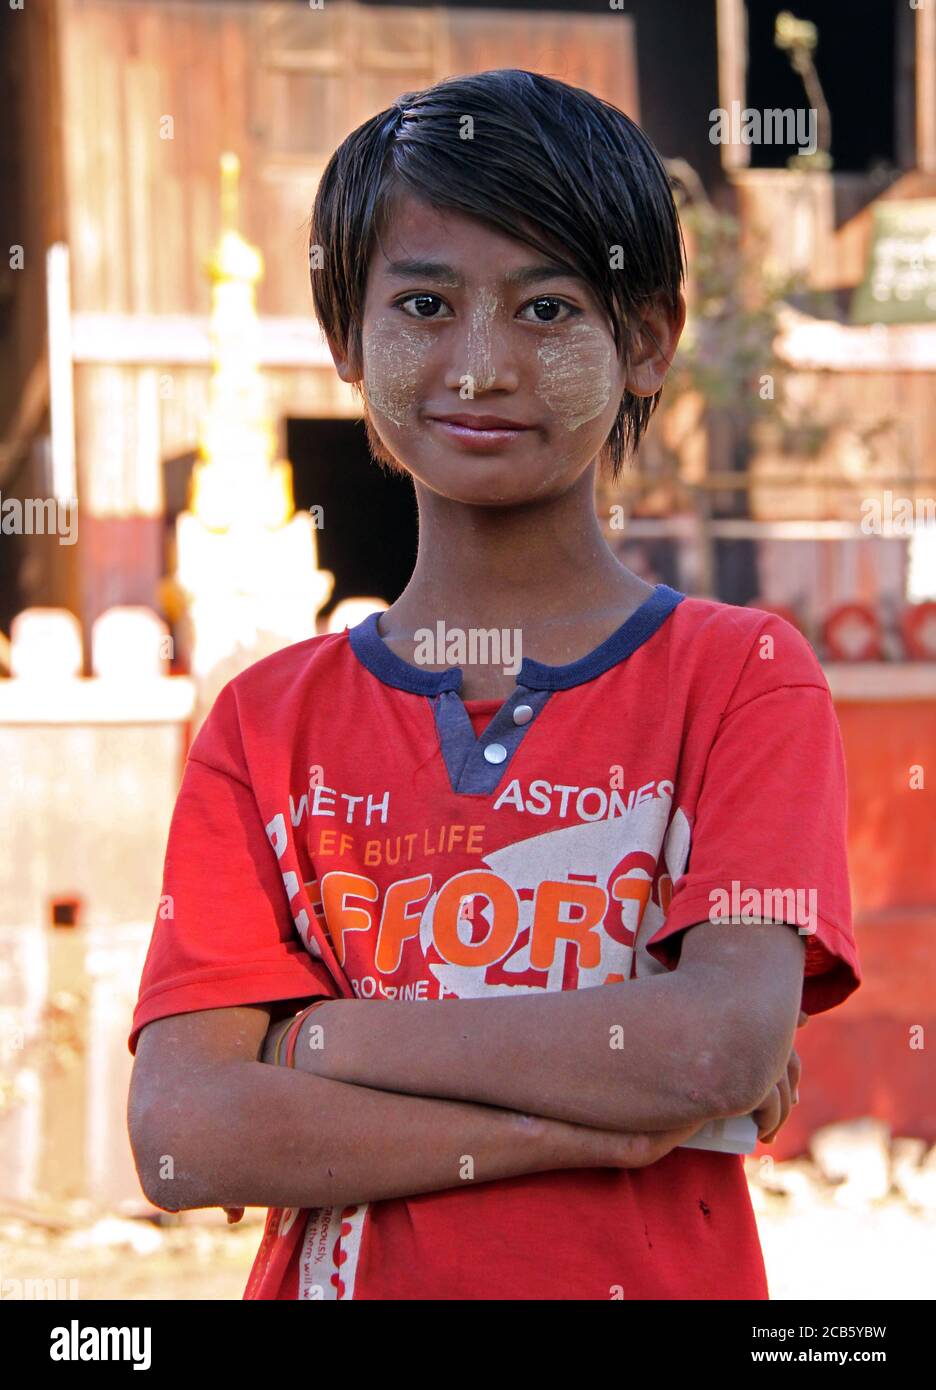 Mandalay, Myanmar - January 31, 2010: close up portrait of unidentified young woman with tanaka paste on her face on a city street on a sunny day Stock Photo